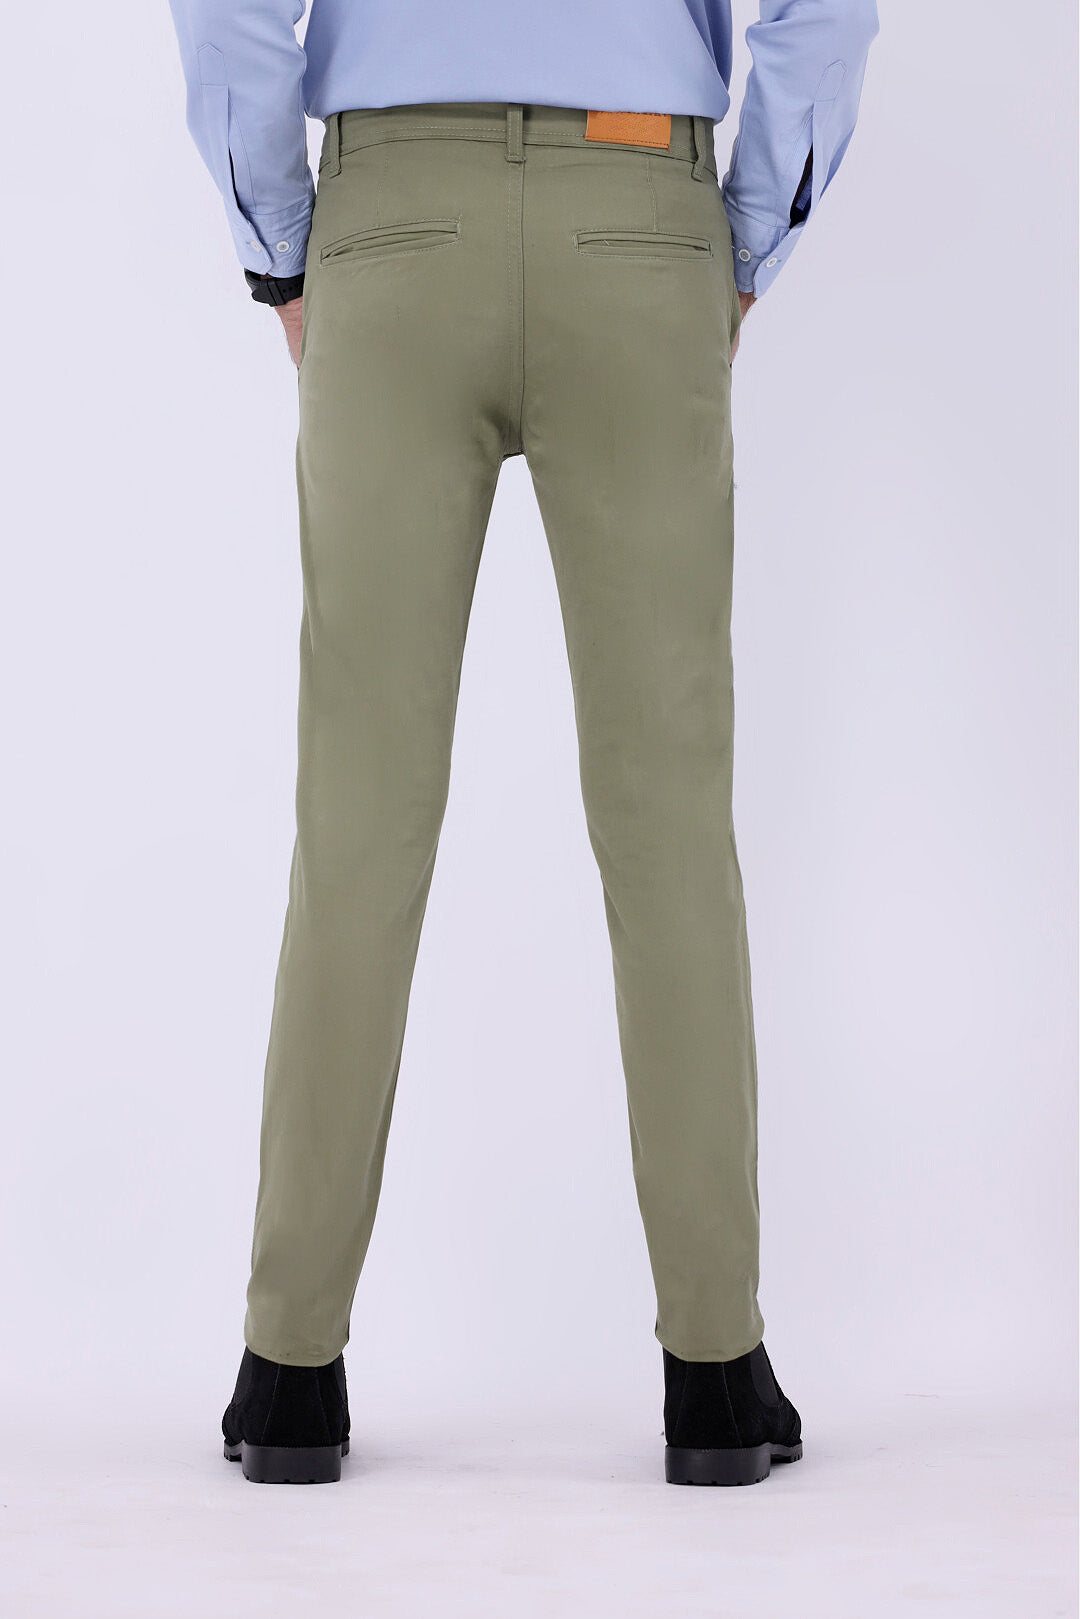 FT Cotton Chinos Pant - Olive Green